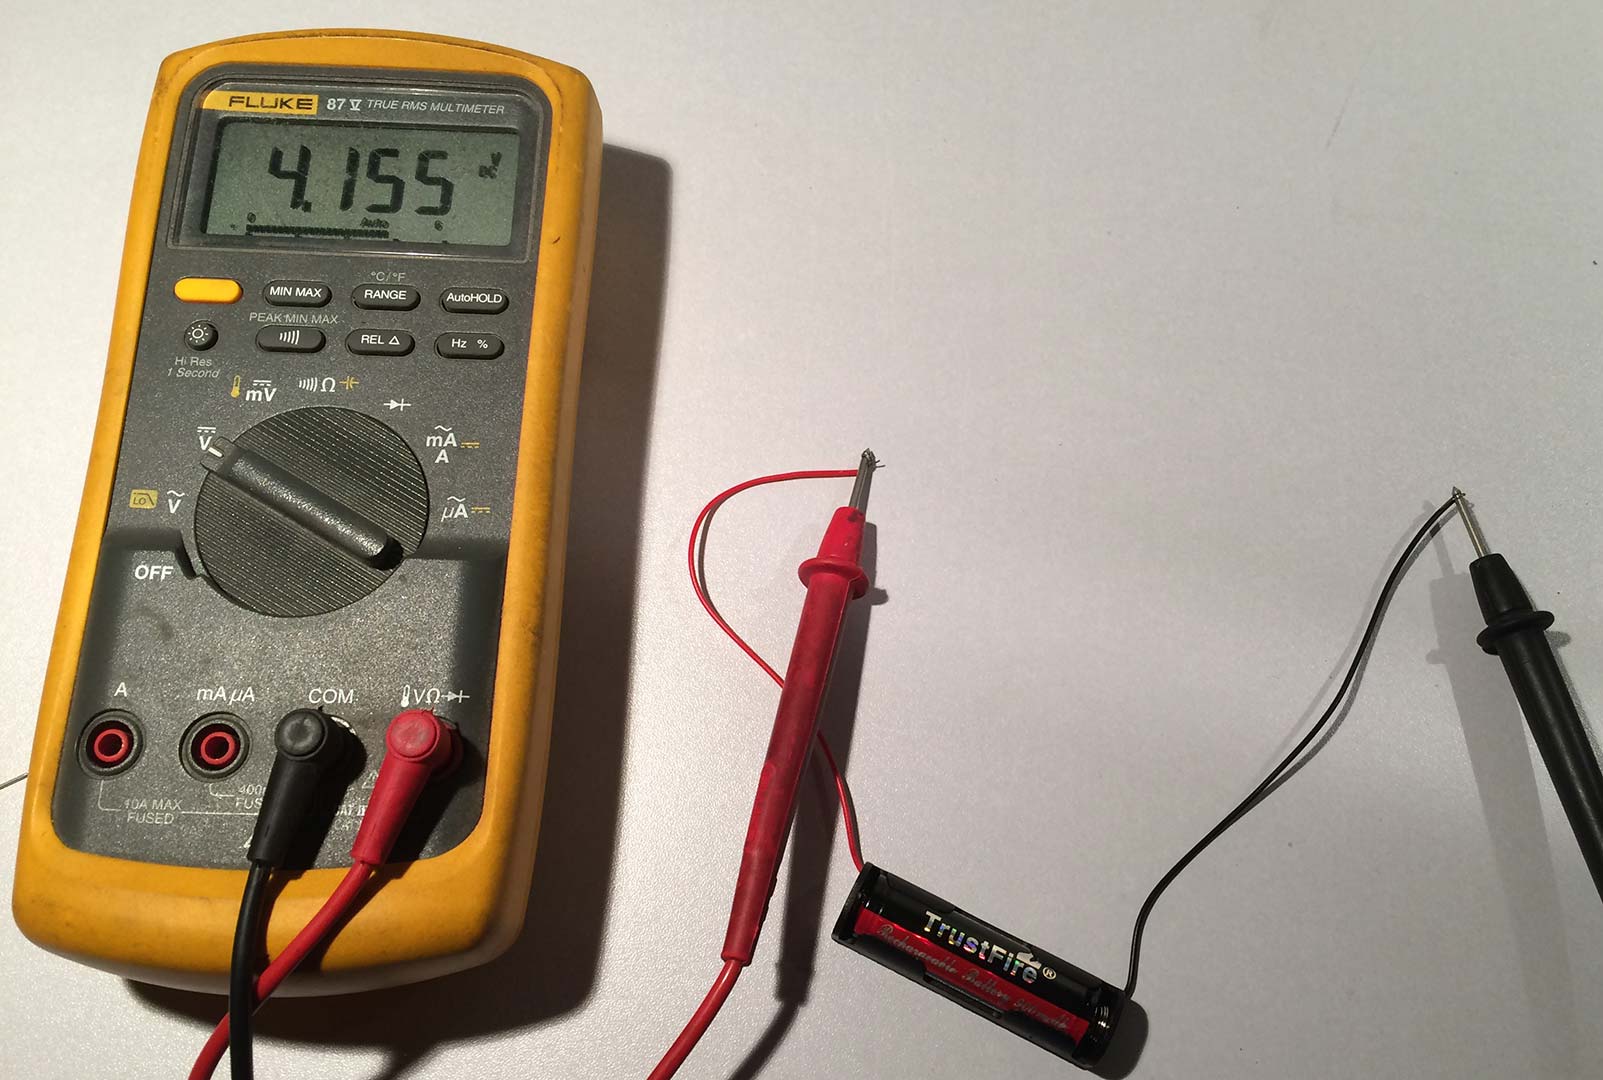 Li-Ion 14500 battery fully charged.